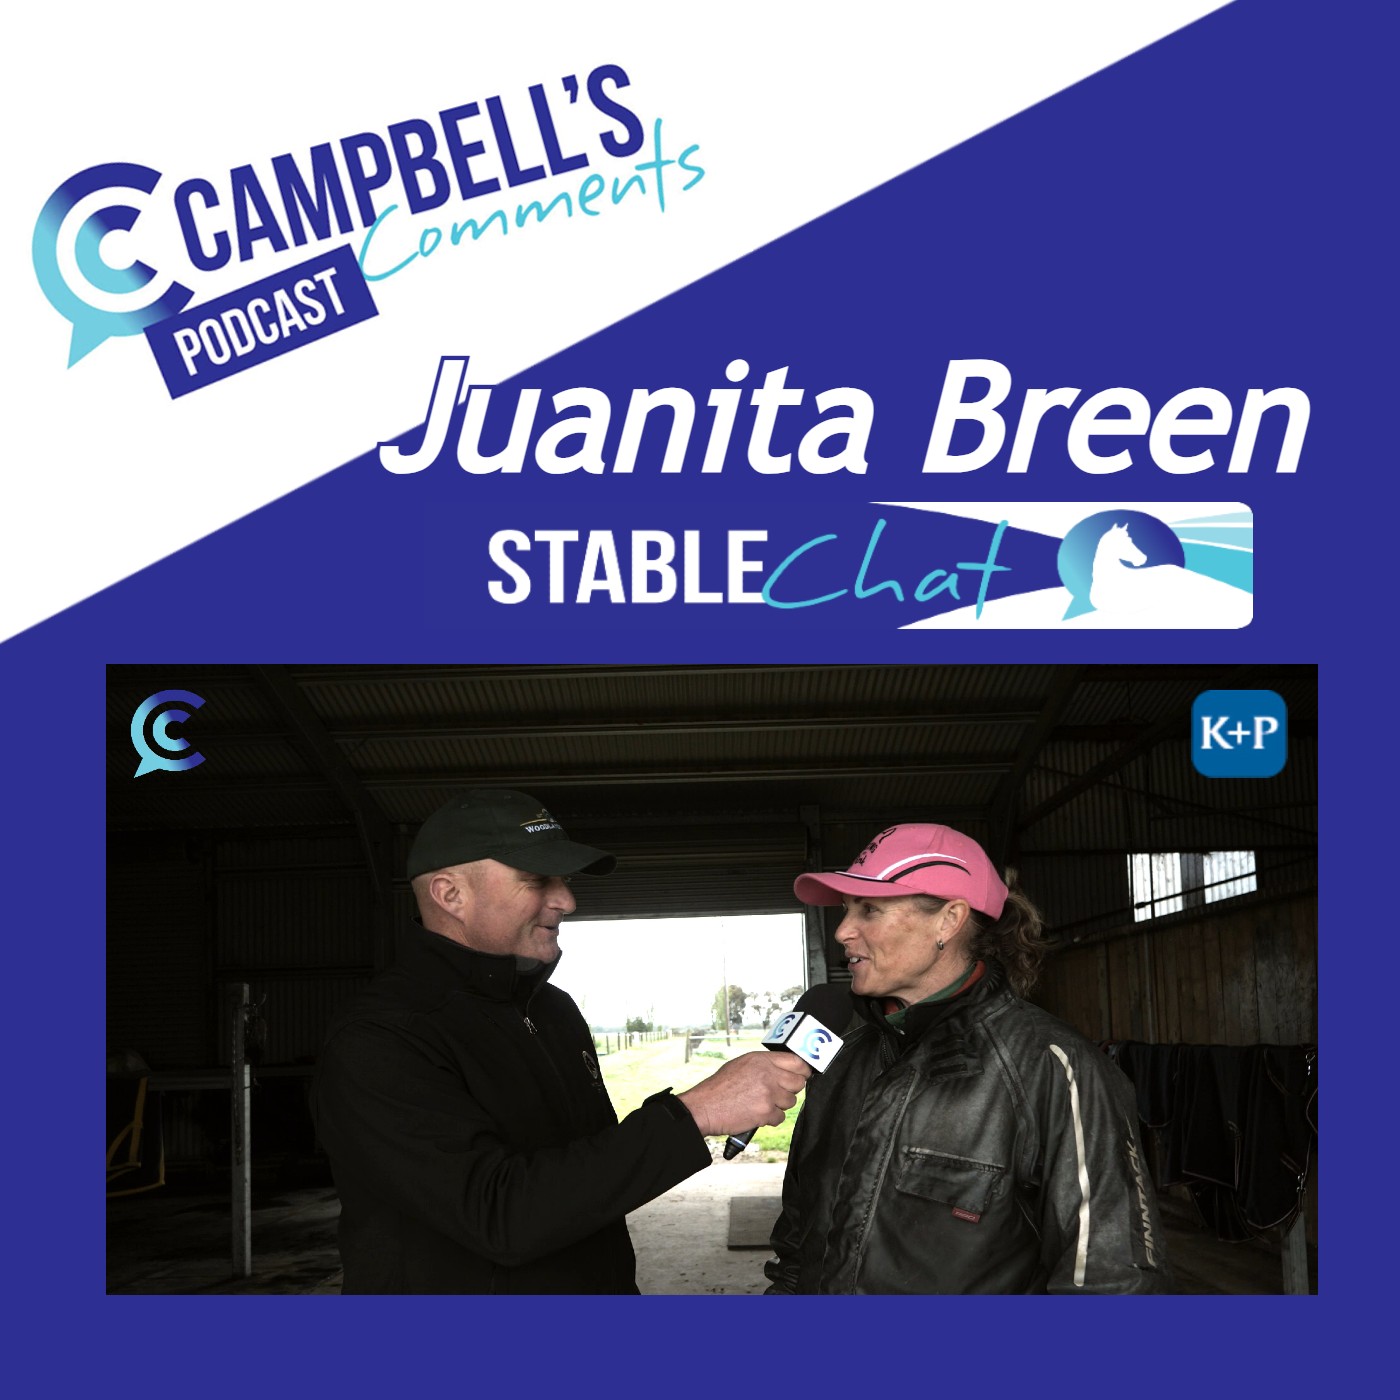 You are currently viewing 207: Campbells Comments Stable Chat with Juanita breen